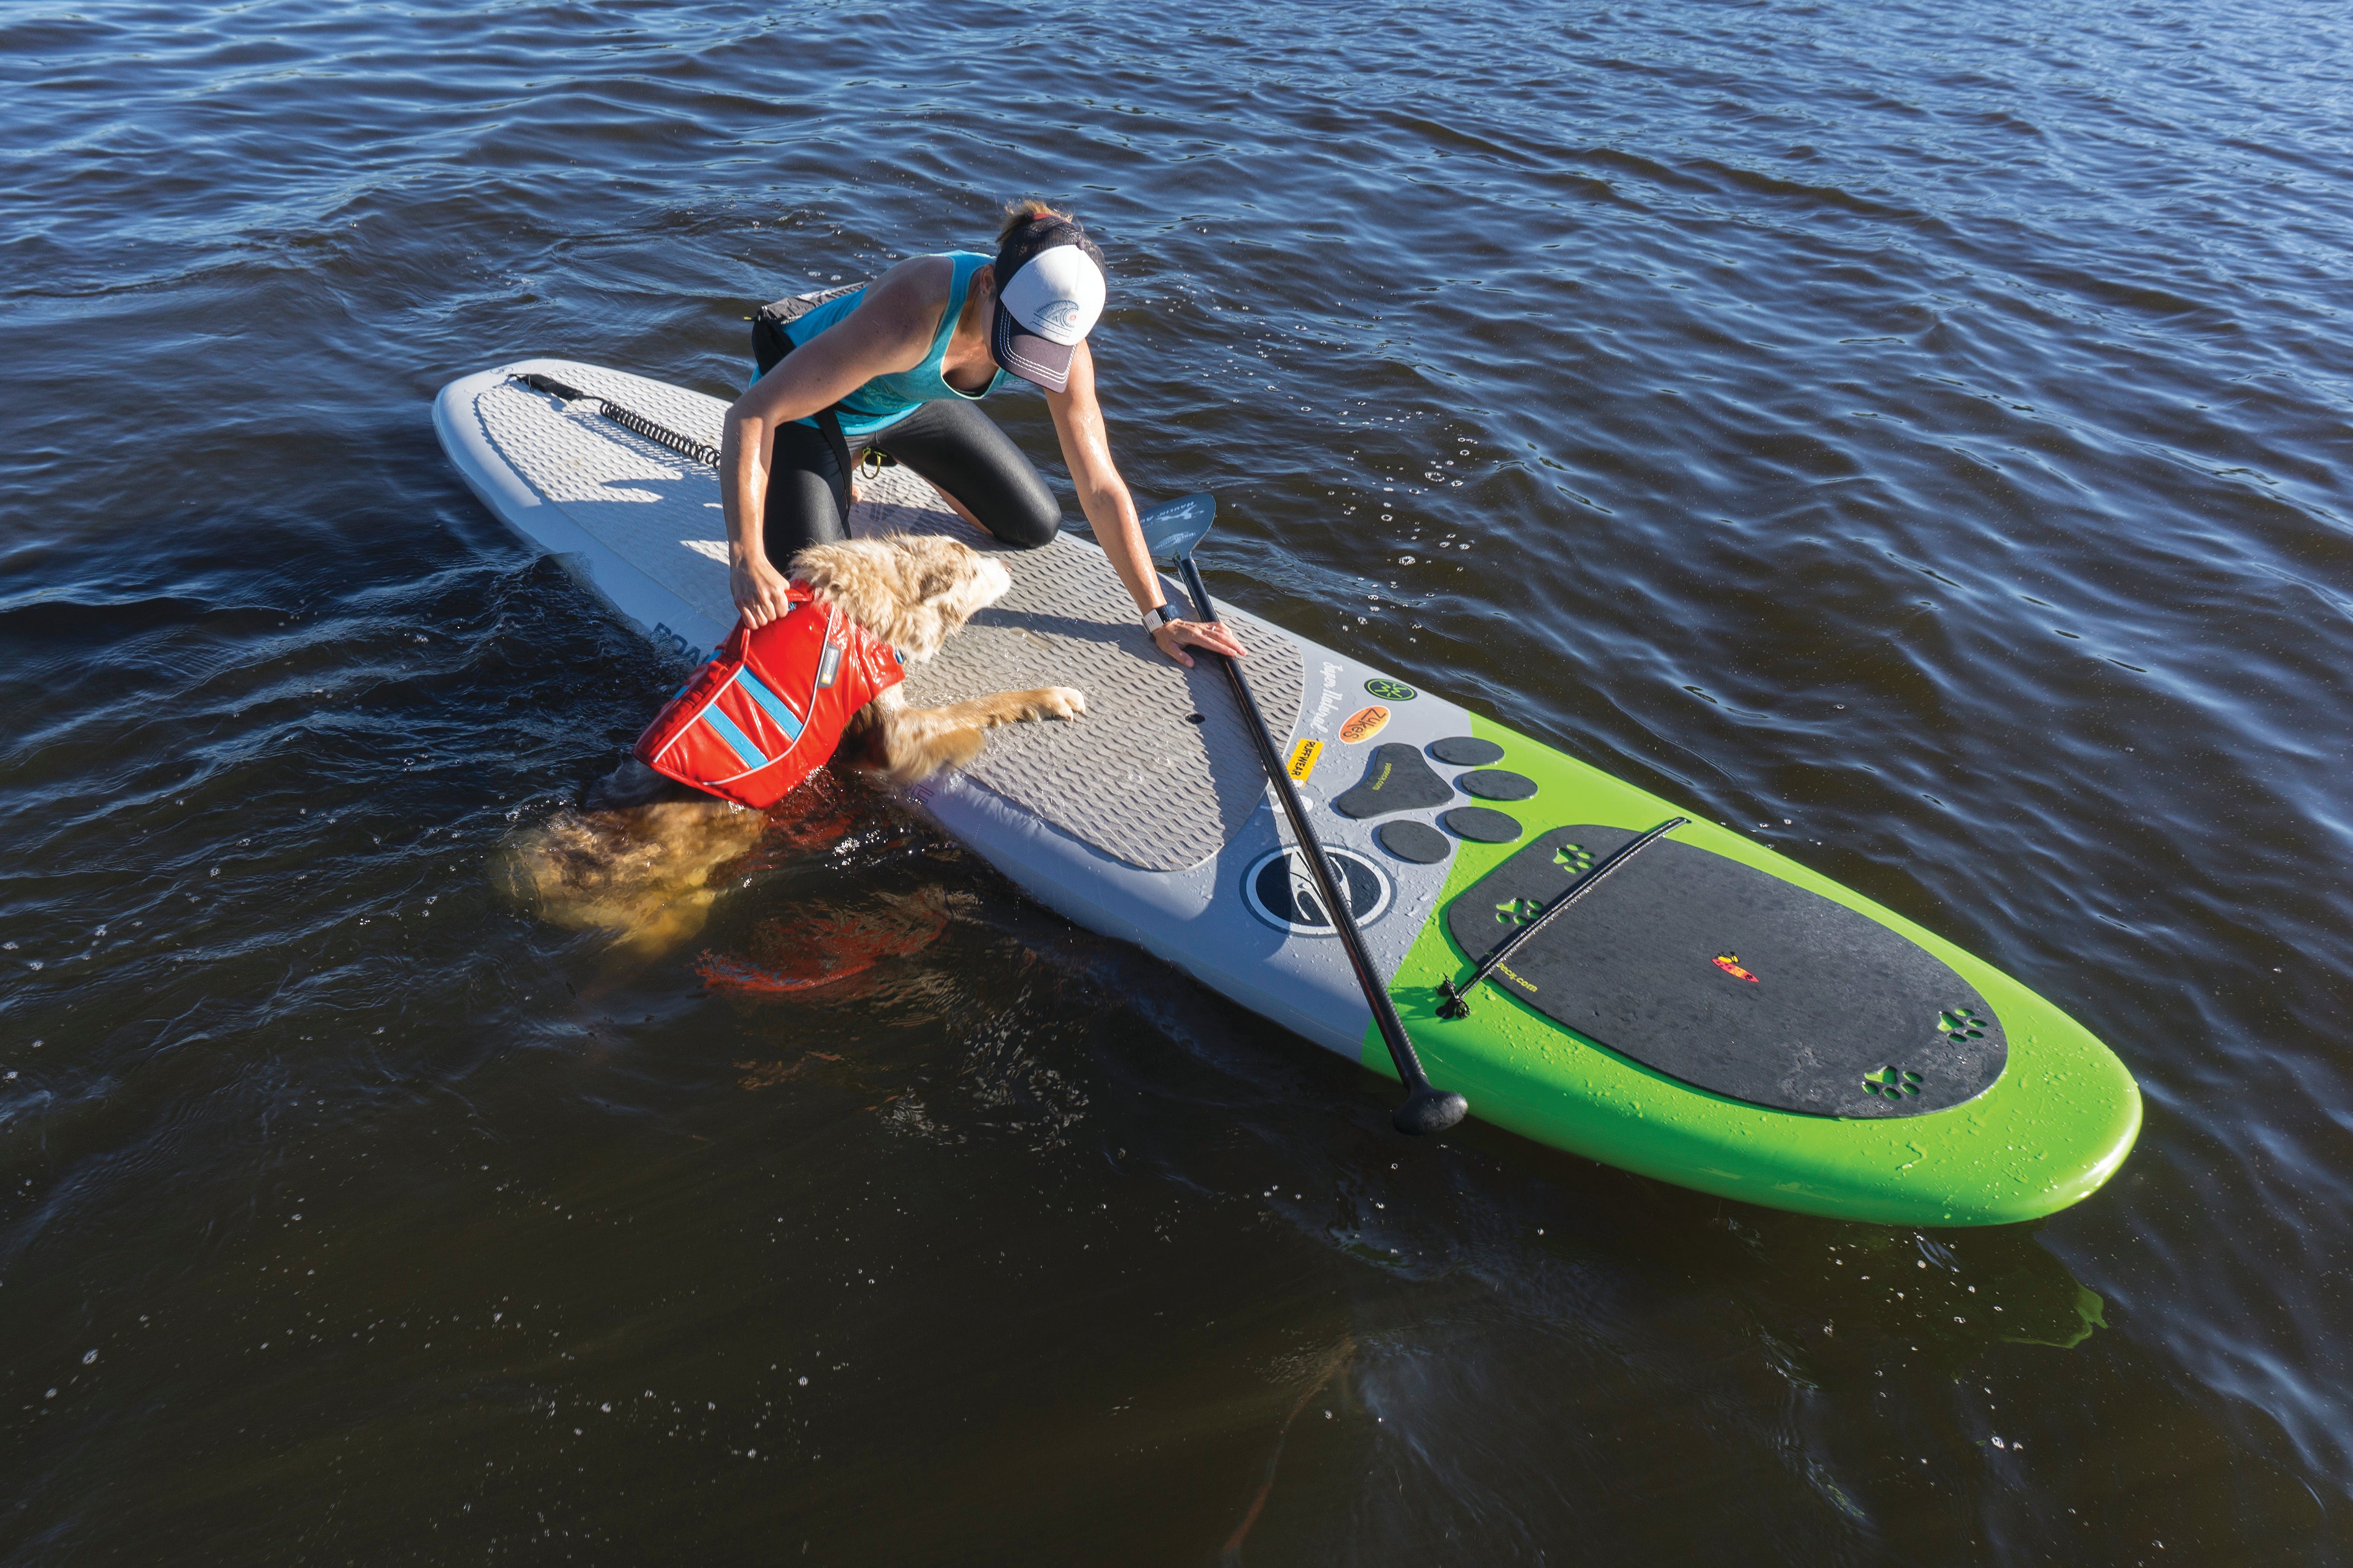 Maria helps bodie onto SUP using float coat handle for lift and assist.